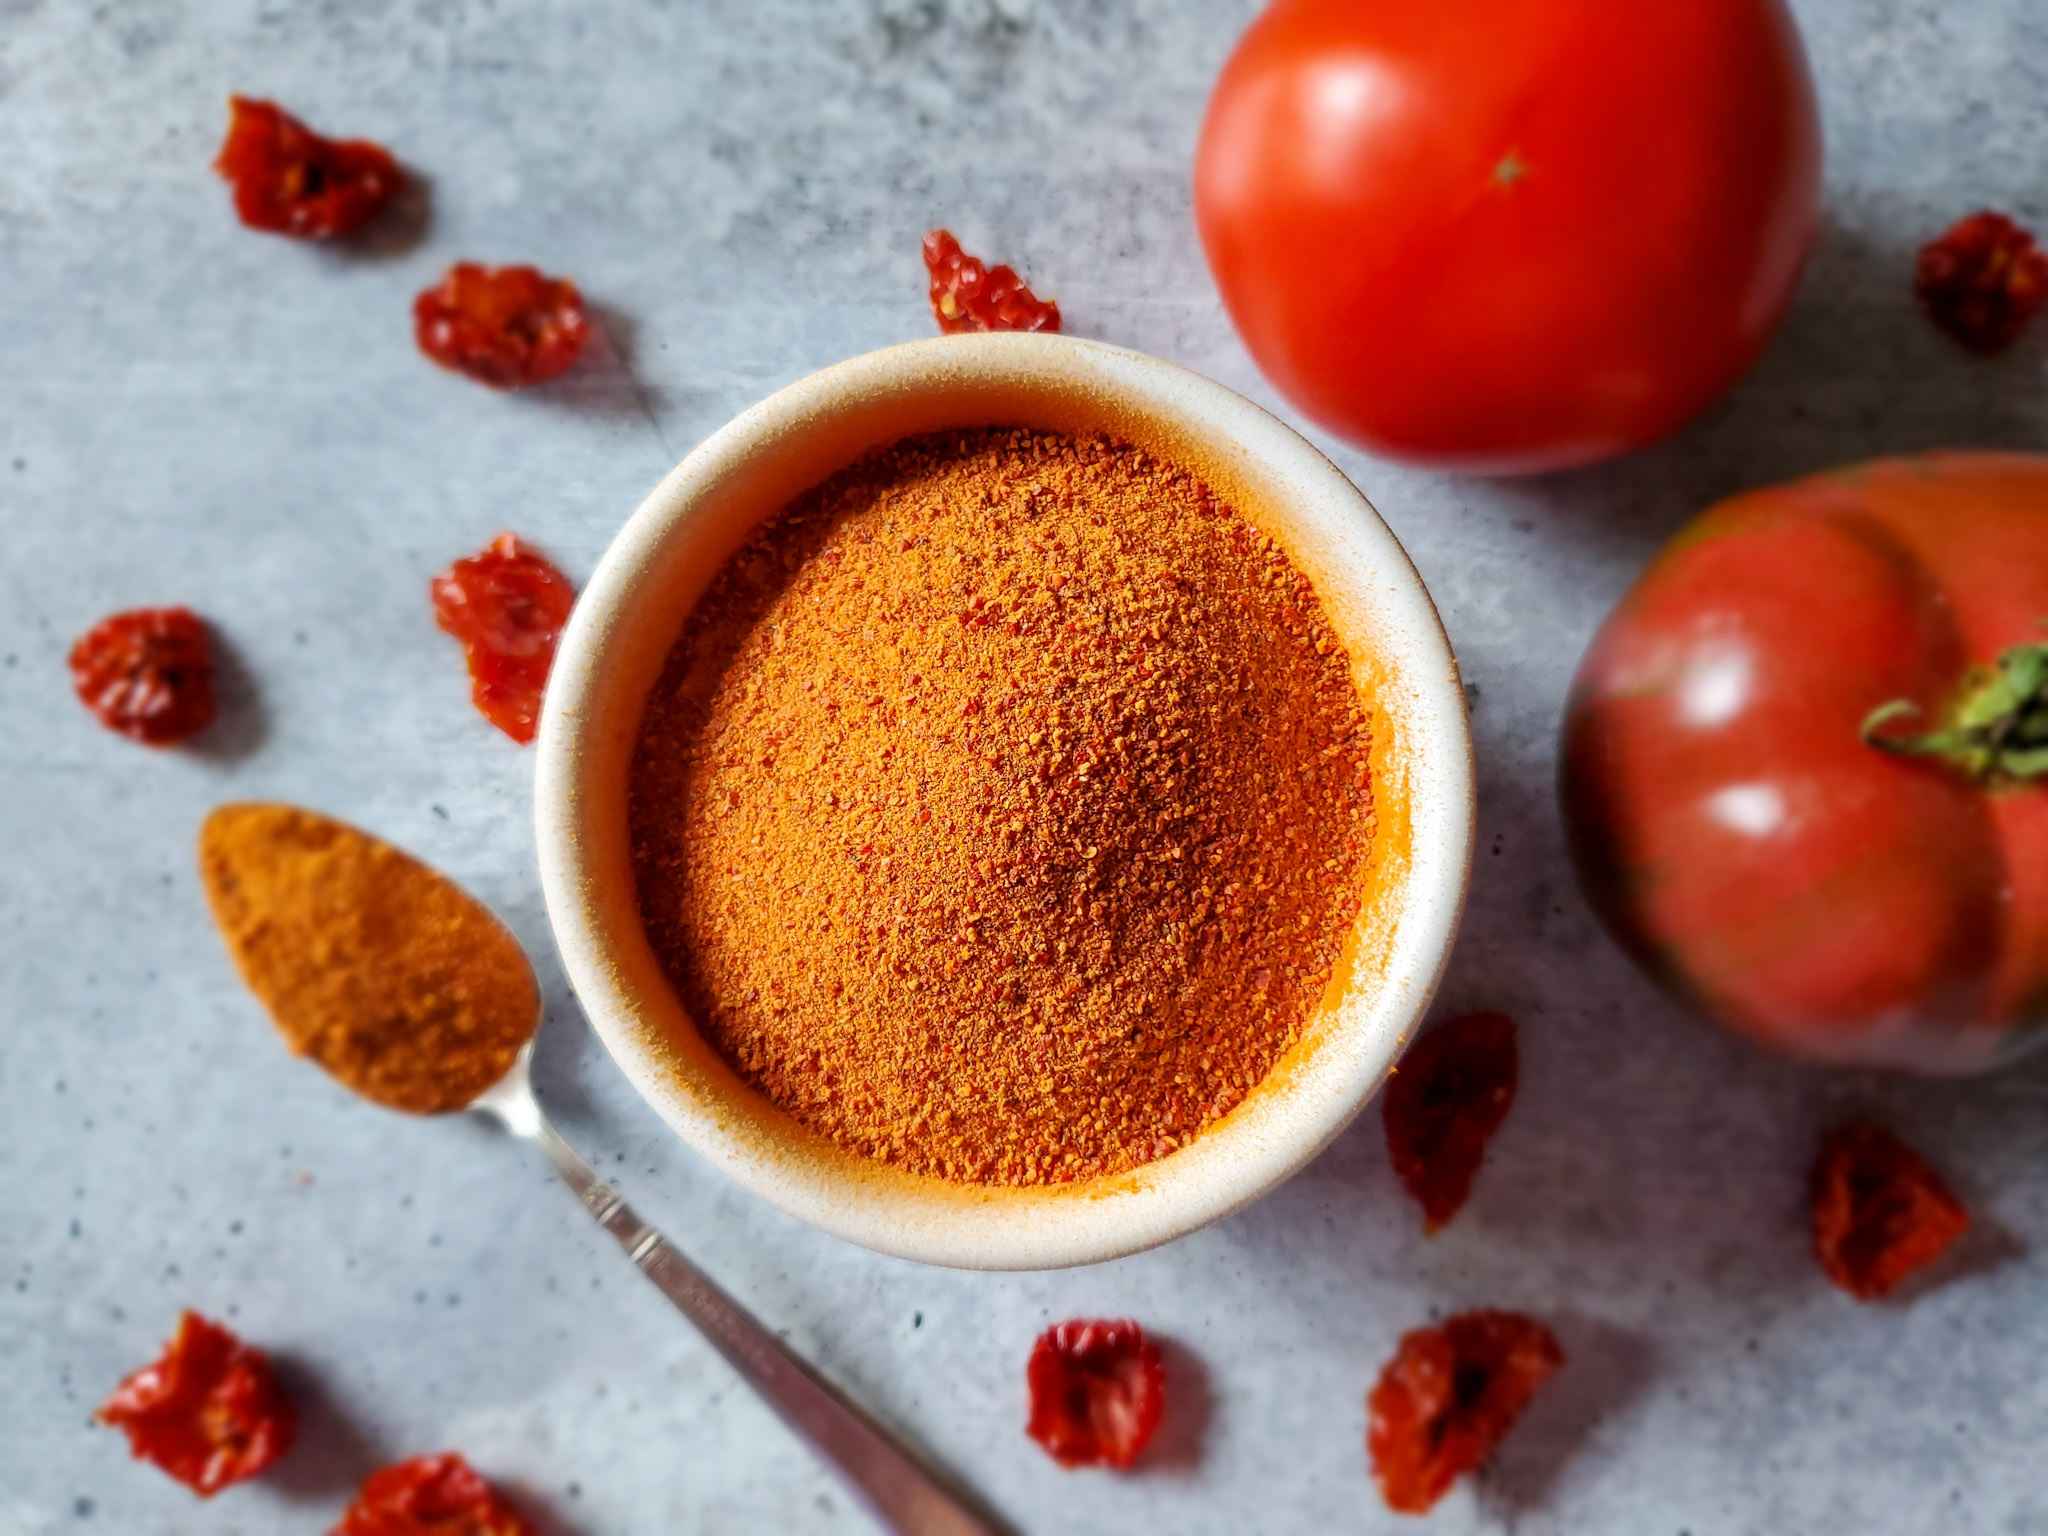 How to start tomato powder making business at home 